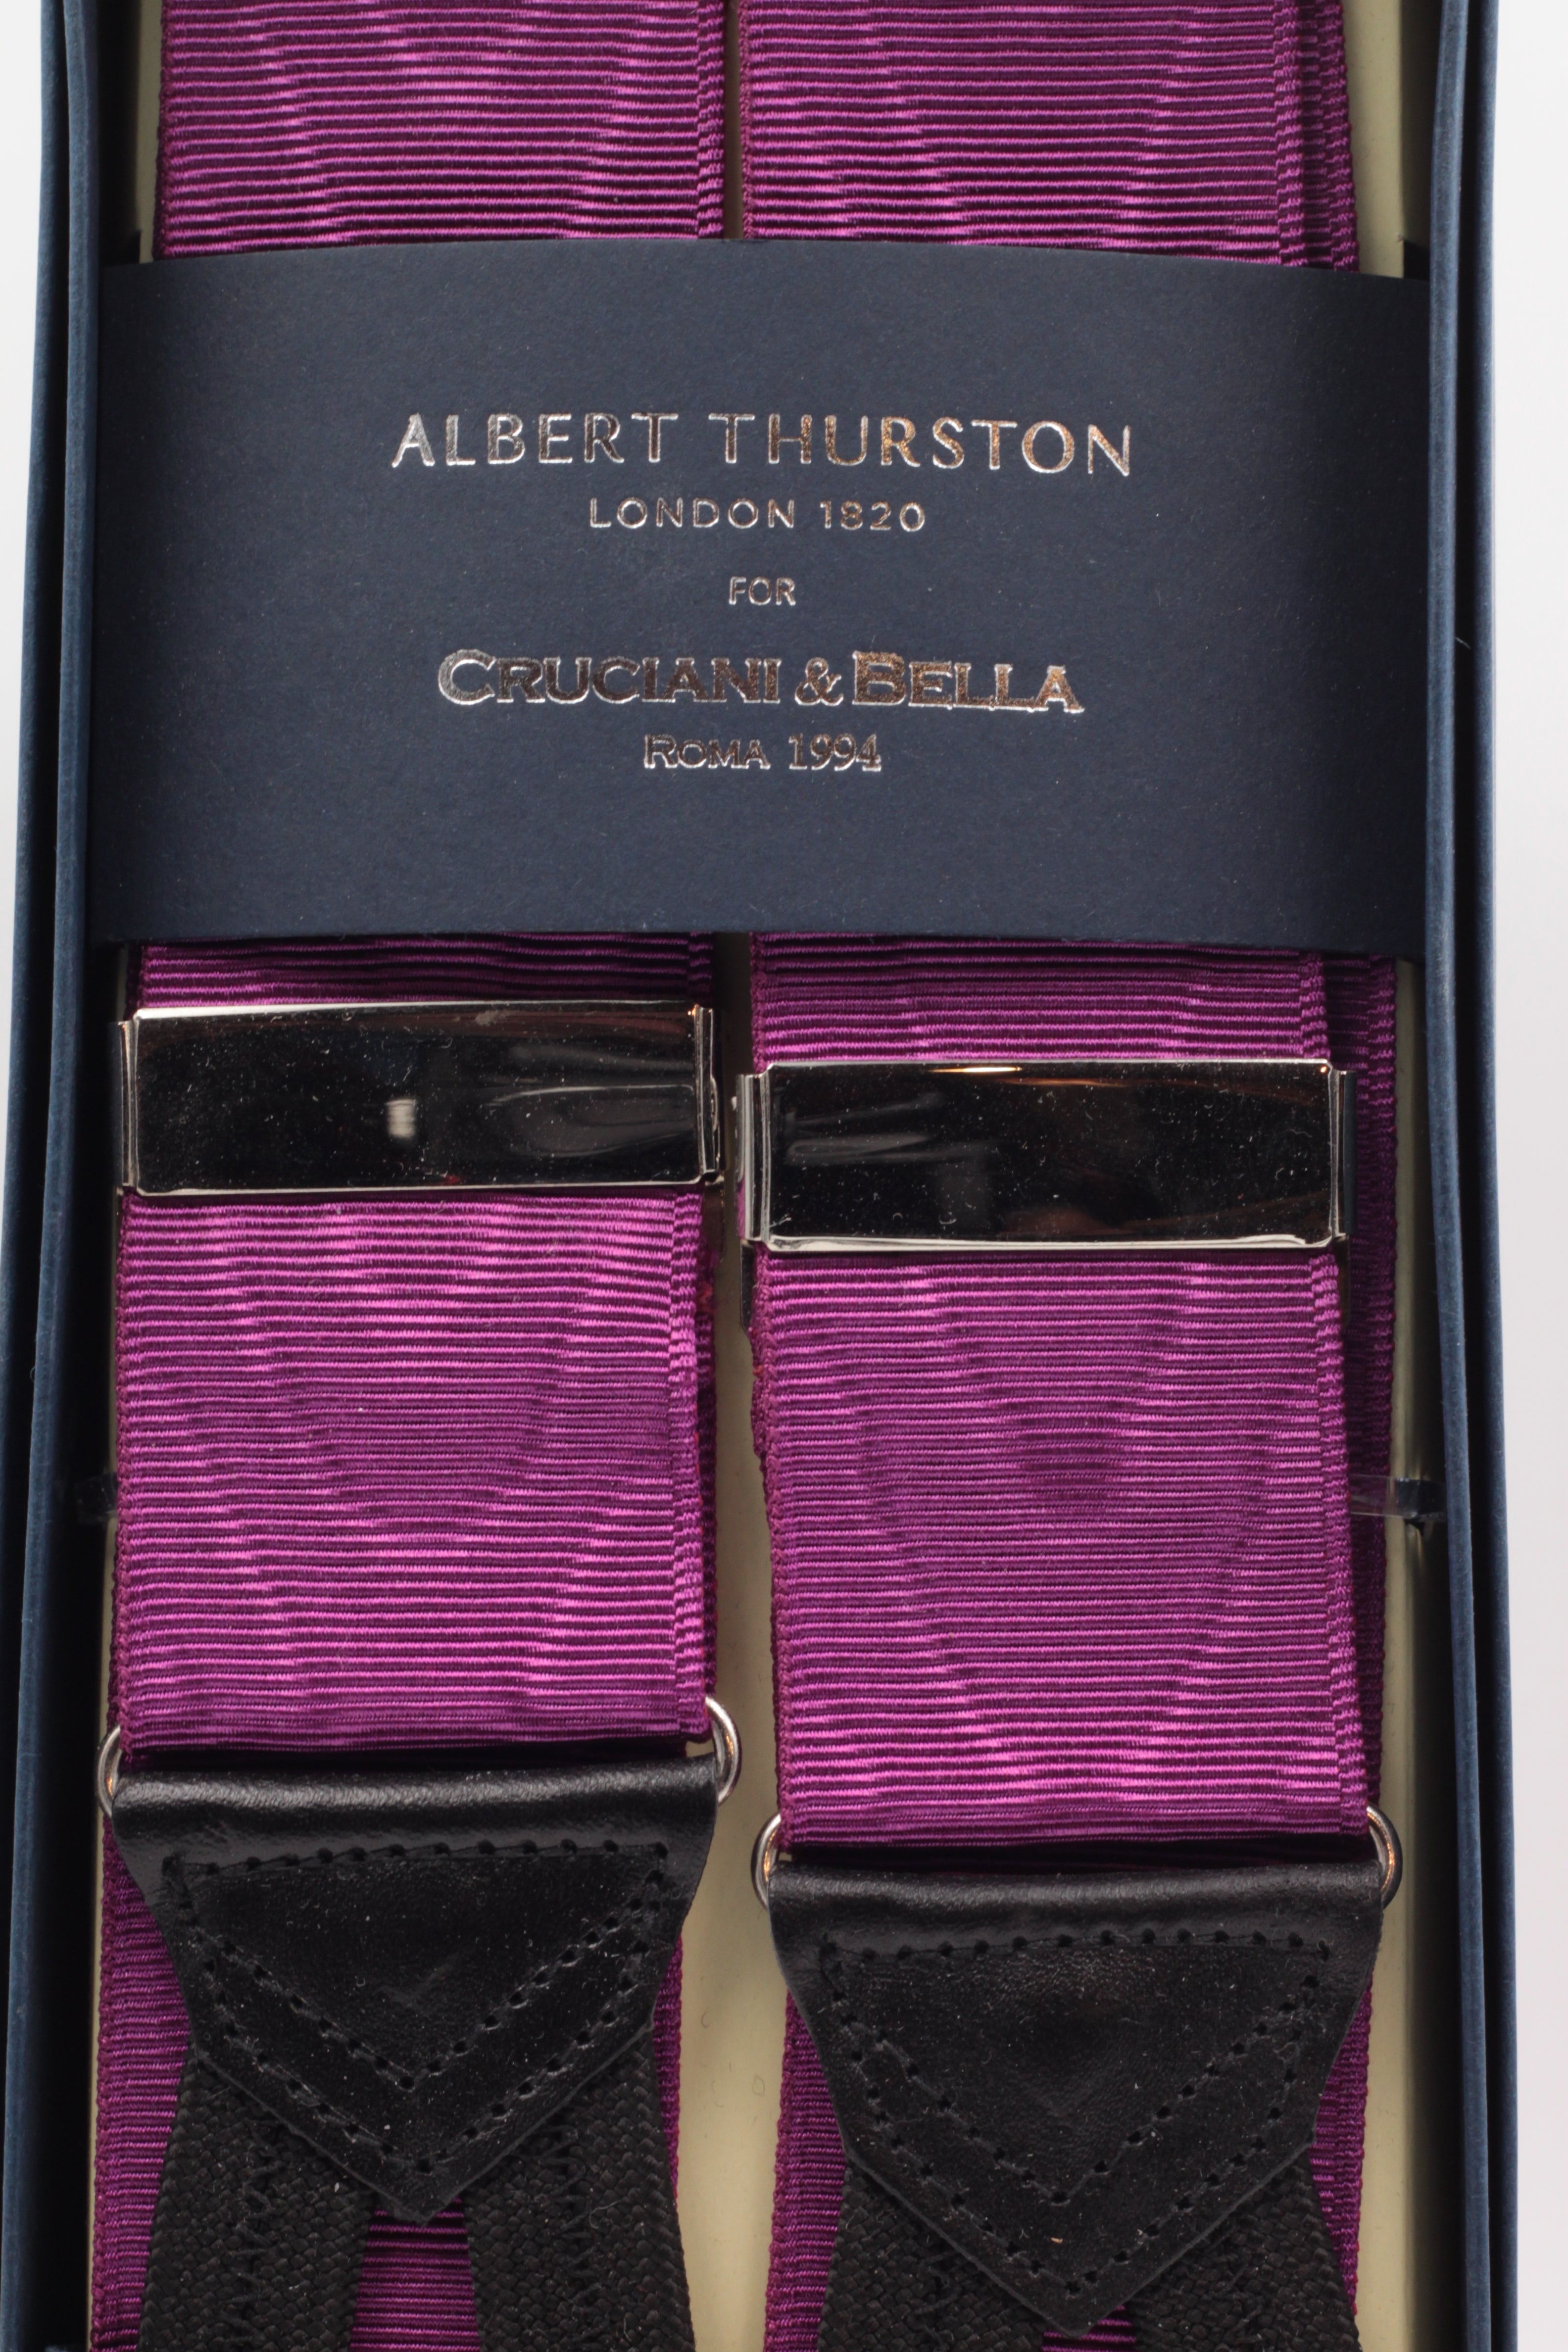 Albert Thurston for Cruciani & Bella Made in England Adjustable Sizing 40 mm Woven Barathea  Purple moiré Braces Braid ends Y-Shaped Brass Fittings Size: XL